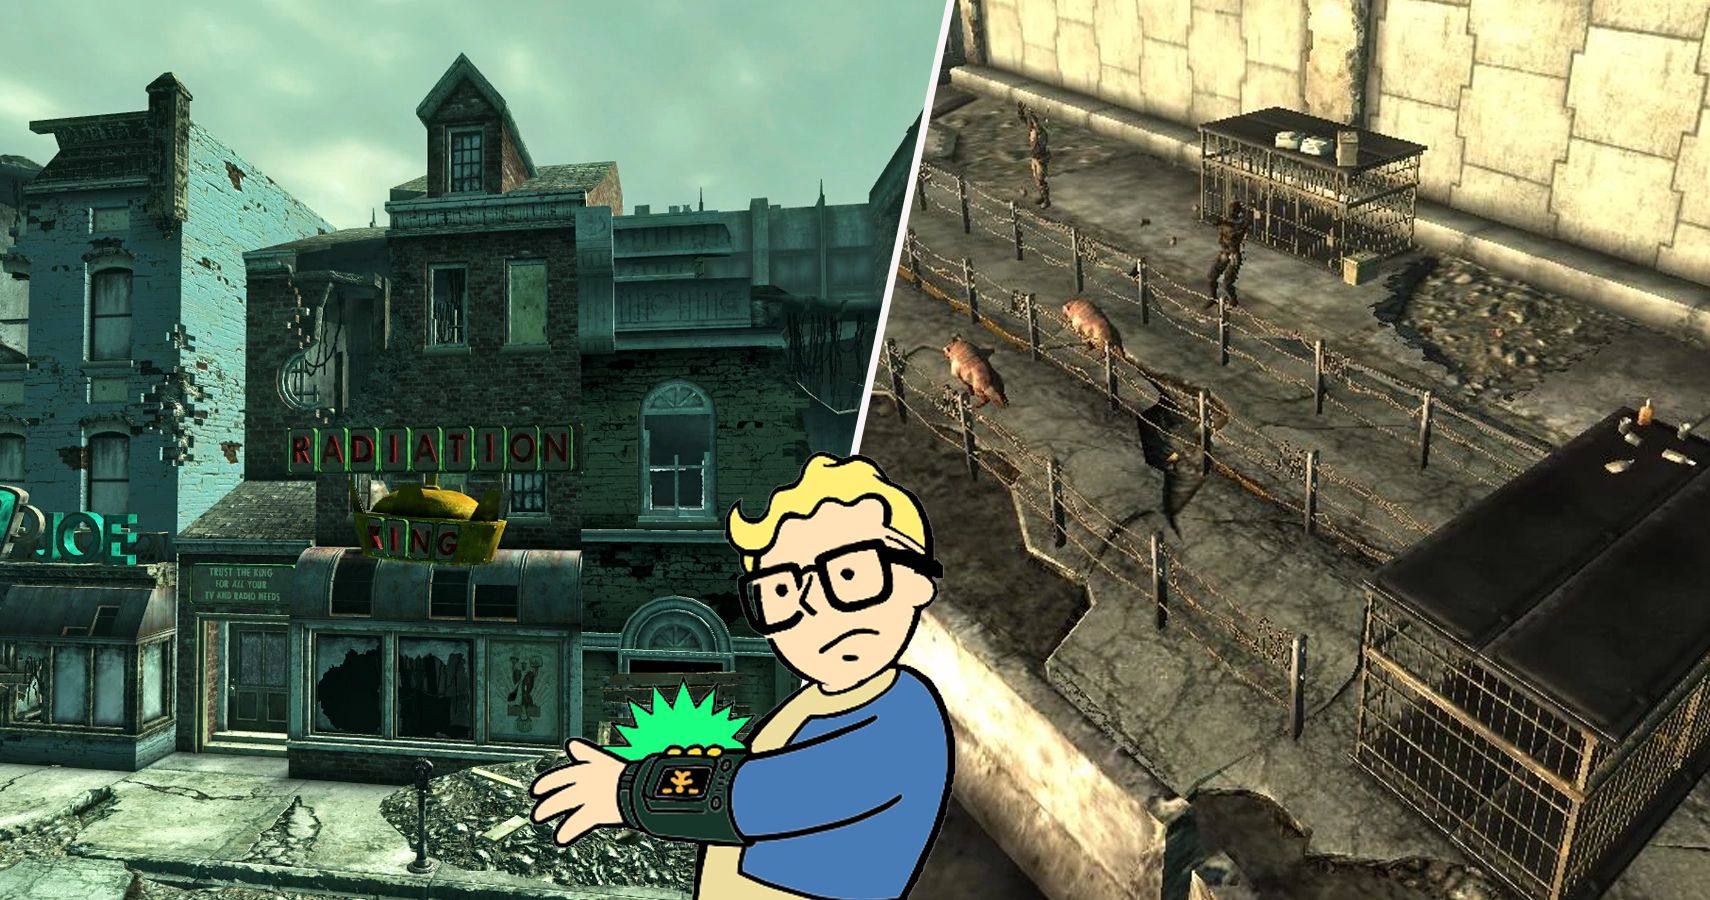 FALLOUT 3 All Locations 